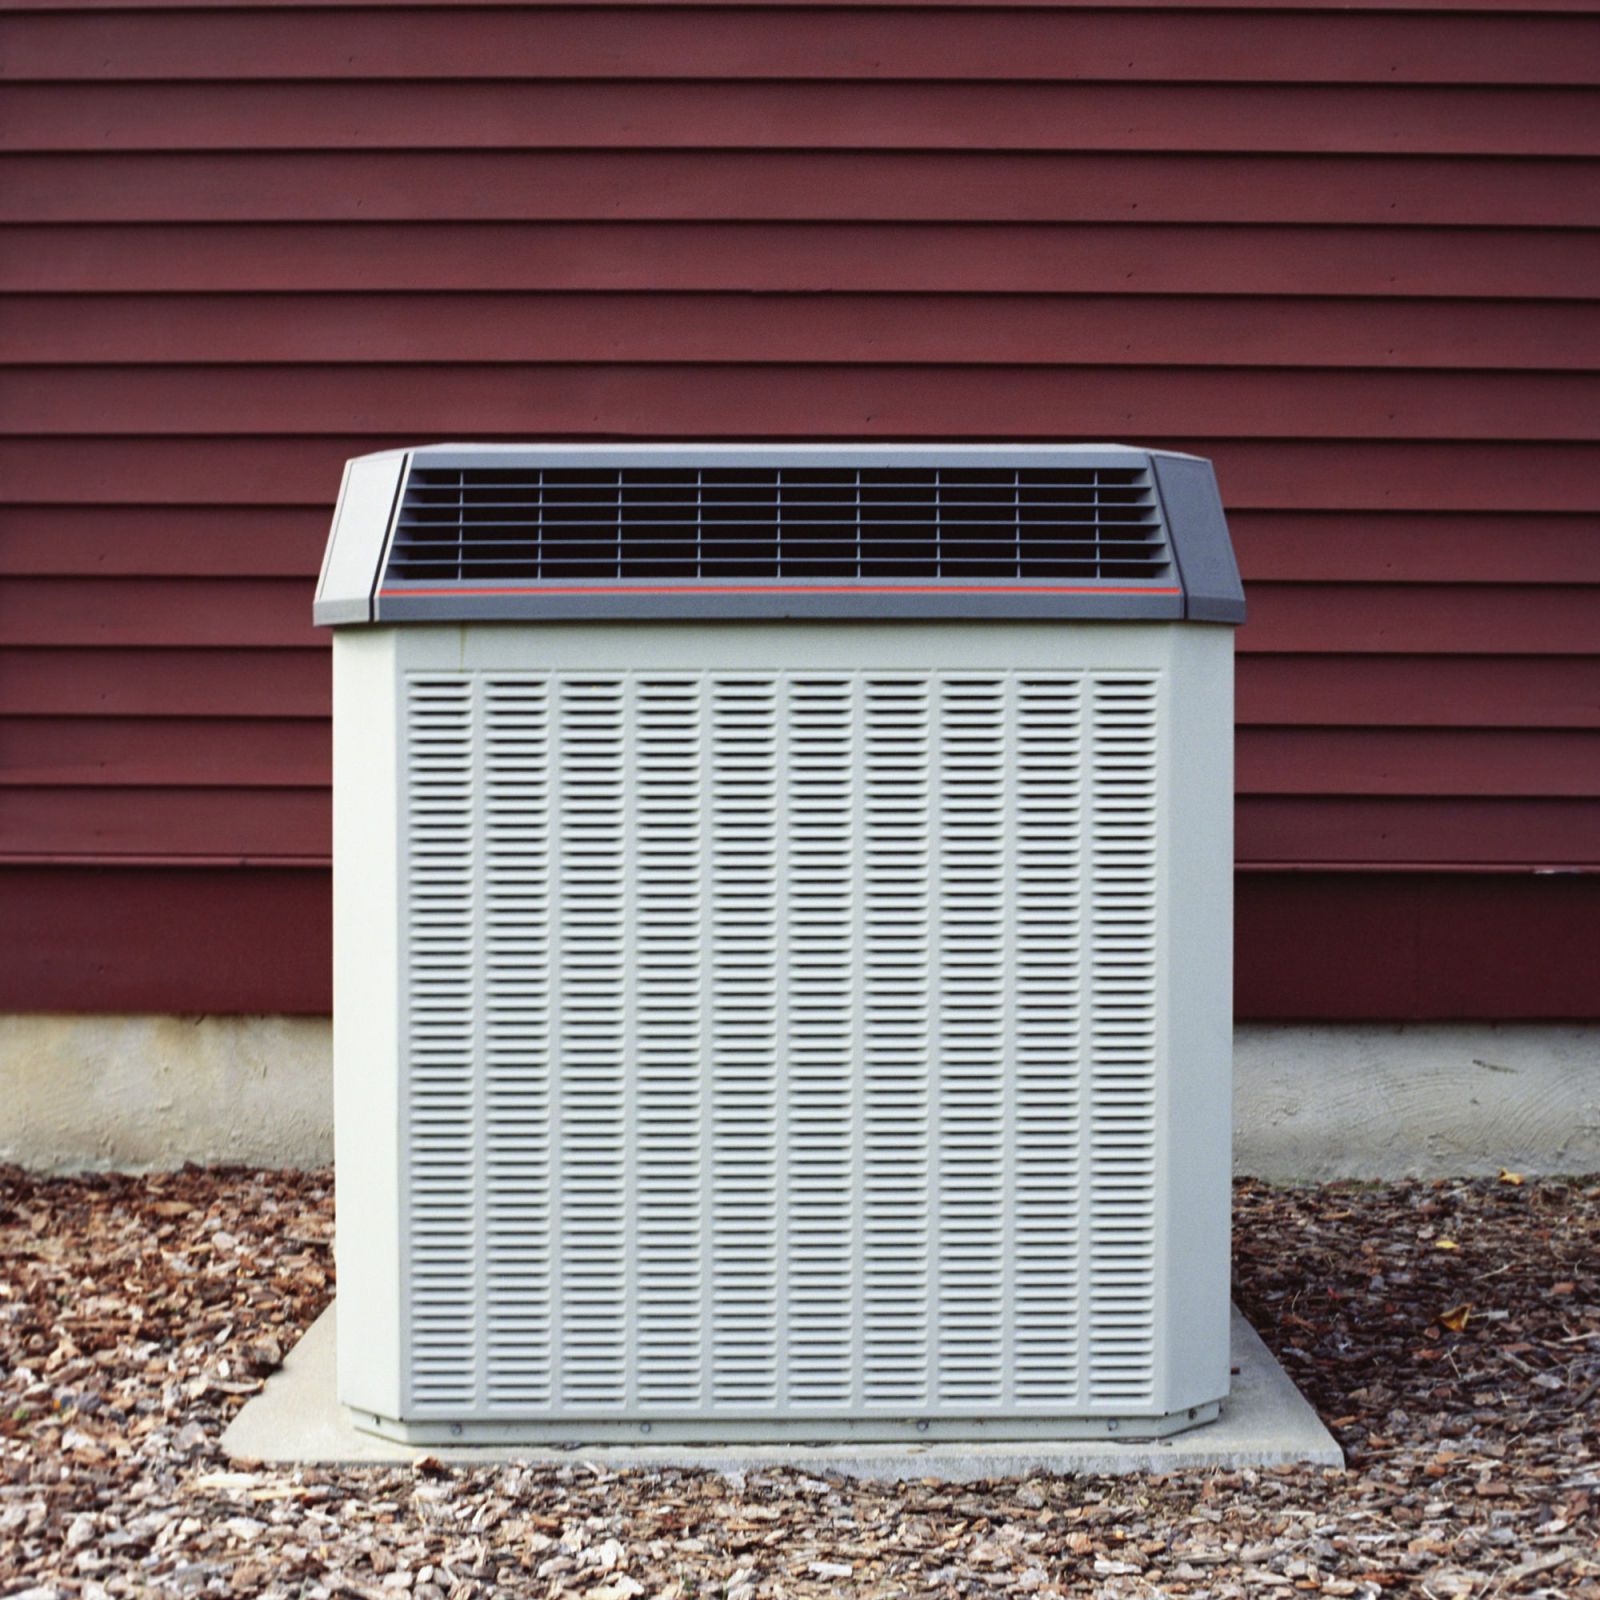 The DIY Guide to Fixing Your Leaky Air Conditioner